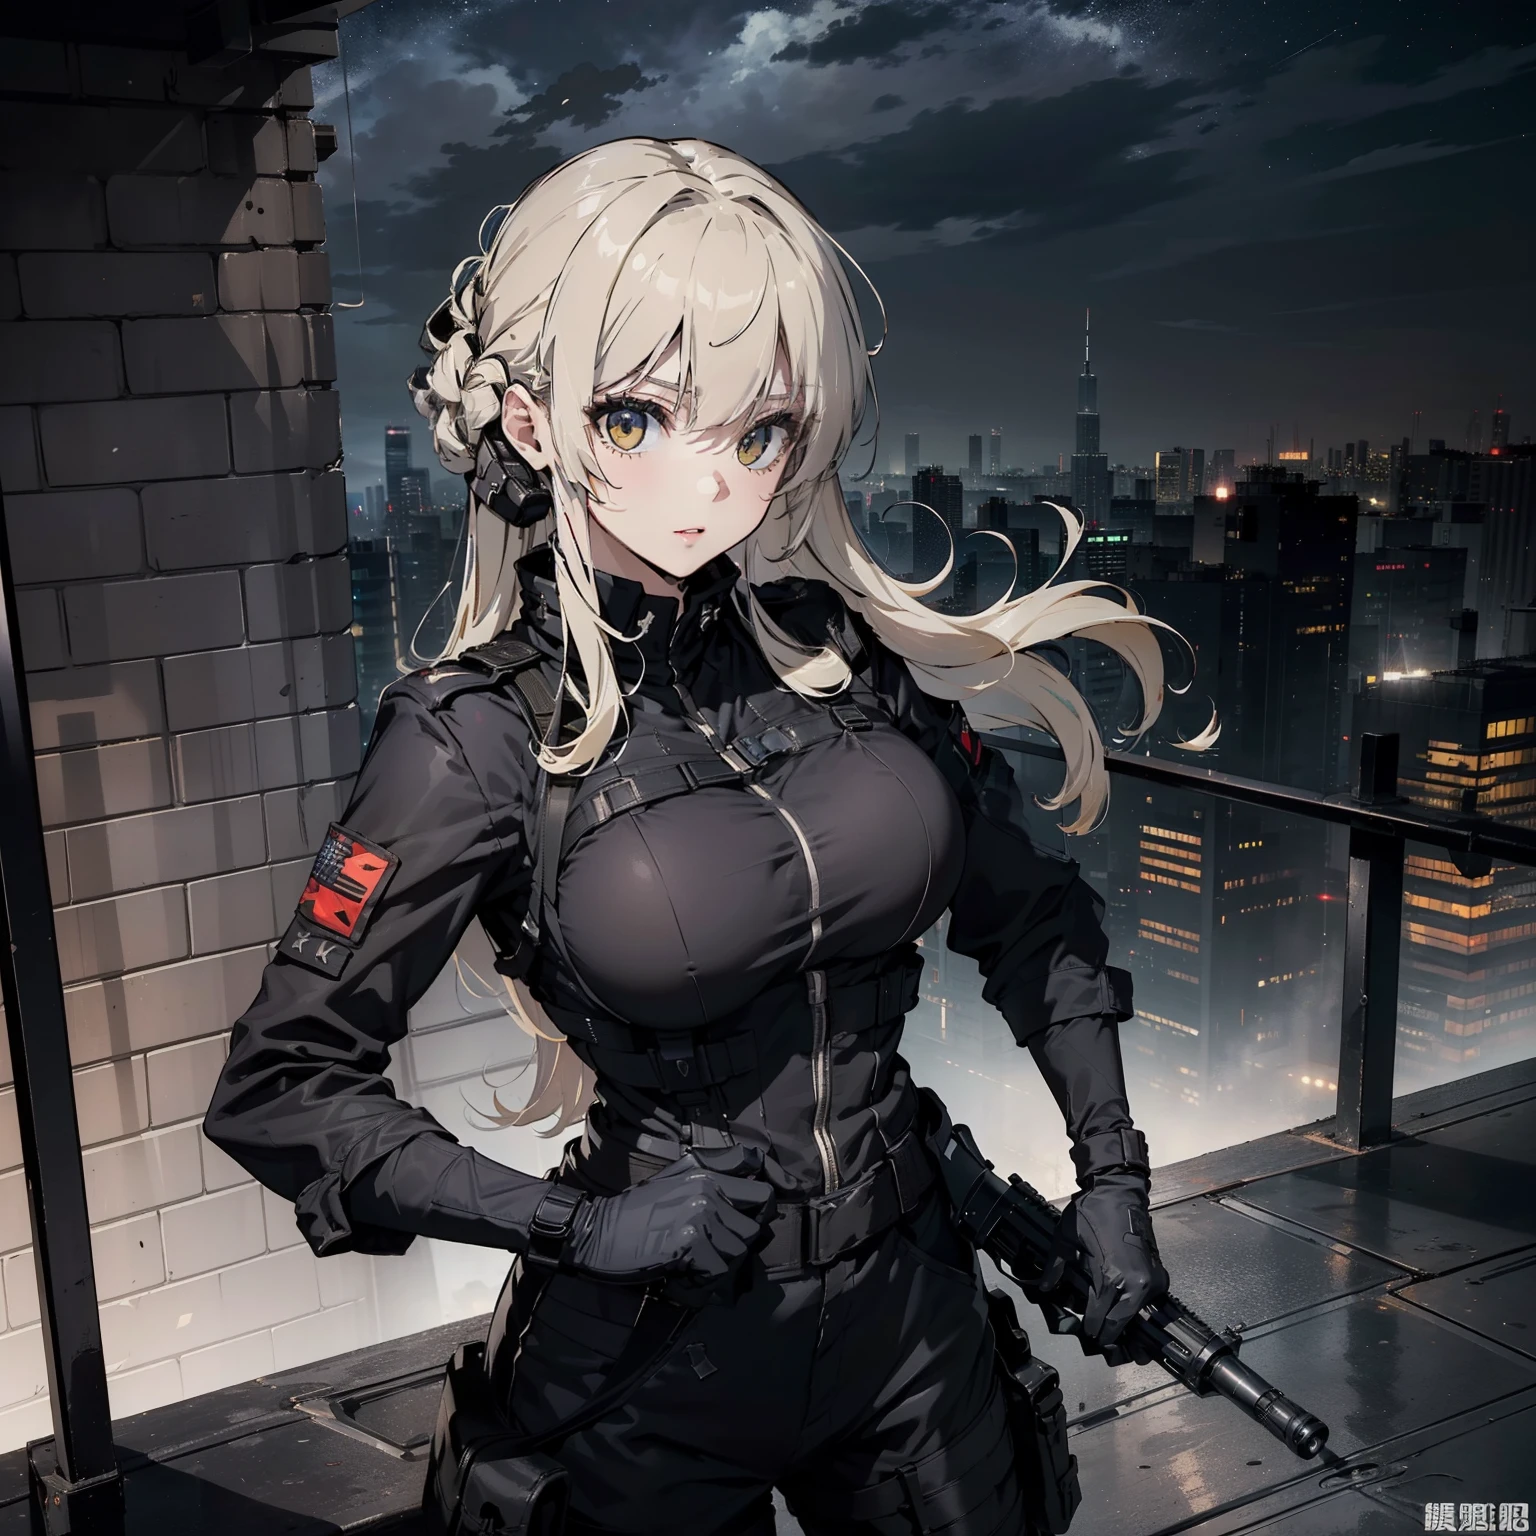 (Trained female soldiers)、((Holding weapons、holding rifle、aim:1.2、fire:1.4、guns、h&K HK416))、1 Women、thick body、(Black combat uniform)、(platinum-blonde-hair:1.2)、((超A high resolution))、Detail Write、​masterpiece、top-quality、extremely details CG、8K picture quality、Cinematographic lighting、lensflare、(Skyscraper rooftop at night:1.4)、Hyper-detailing、((Enlarge bust shots:1.4))、Detailed firearm depiction、Rifle with perfect detail、Perfect barrel that does not distort、Fighter in the sky、Military drones